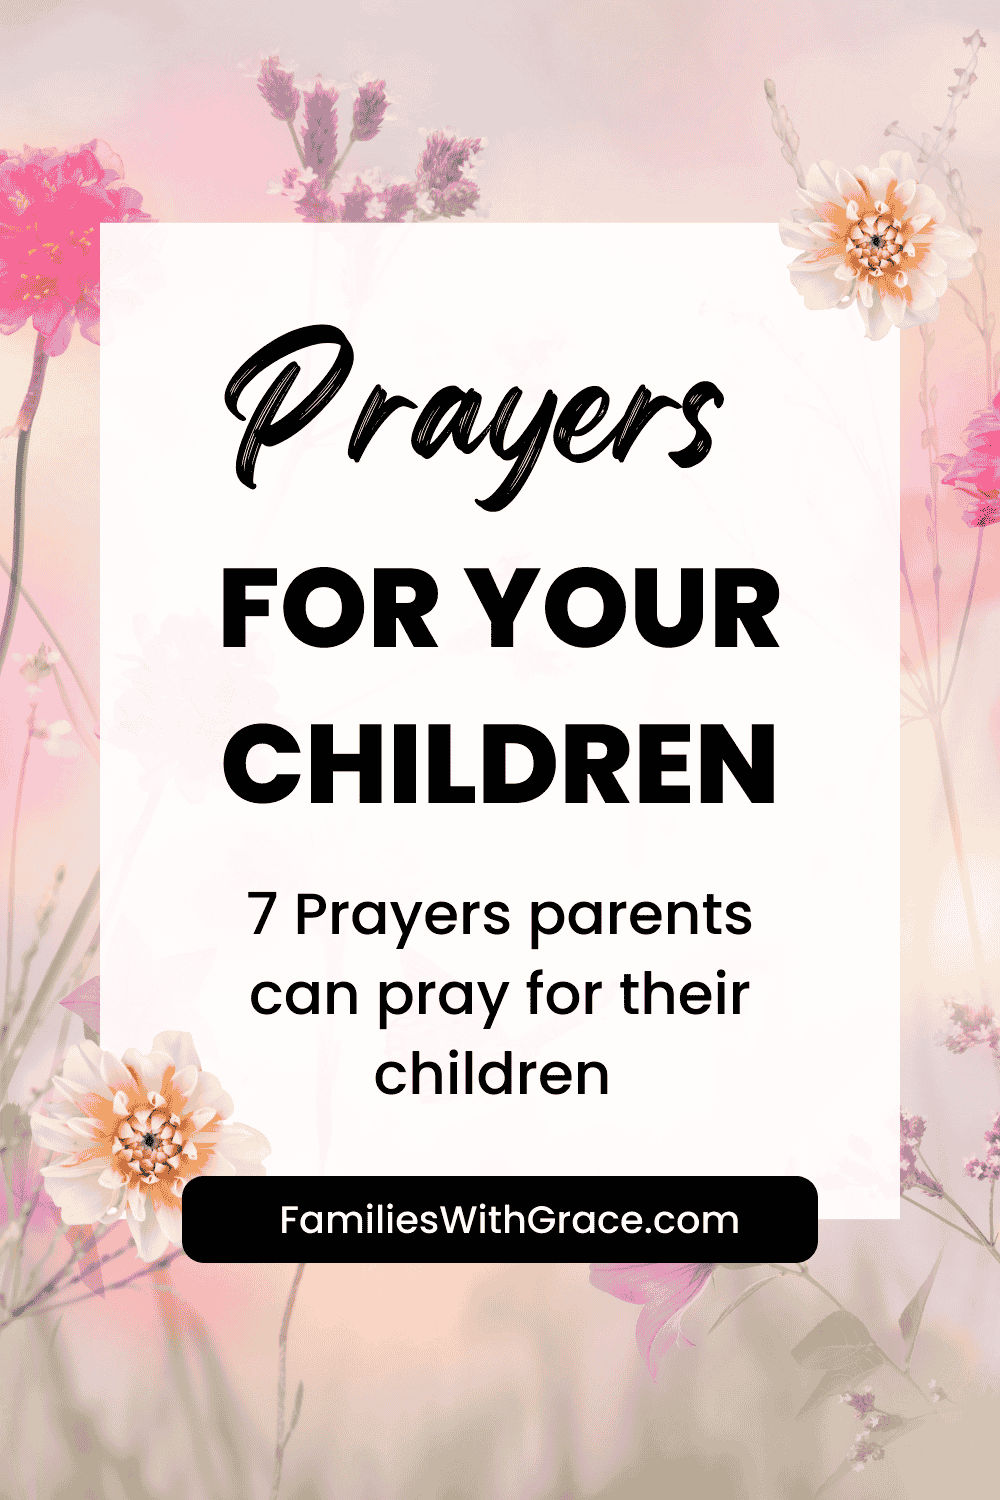 Prayers for your children: Part 2